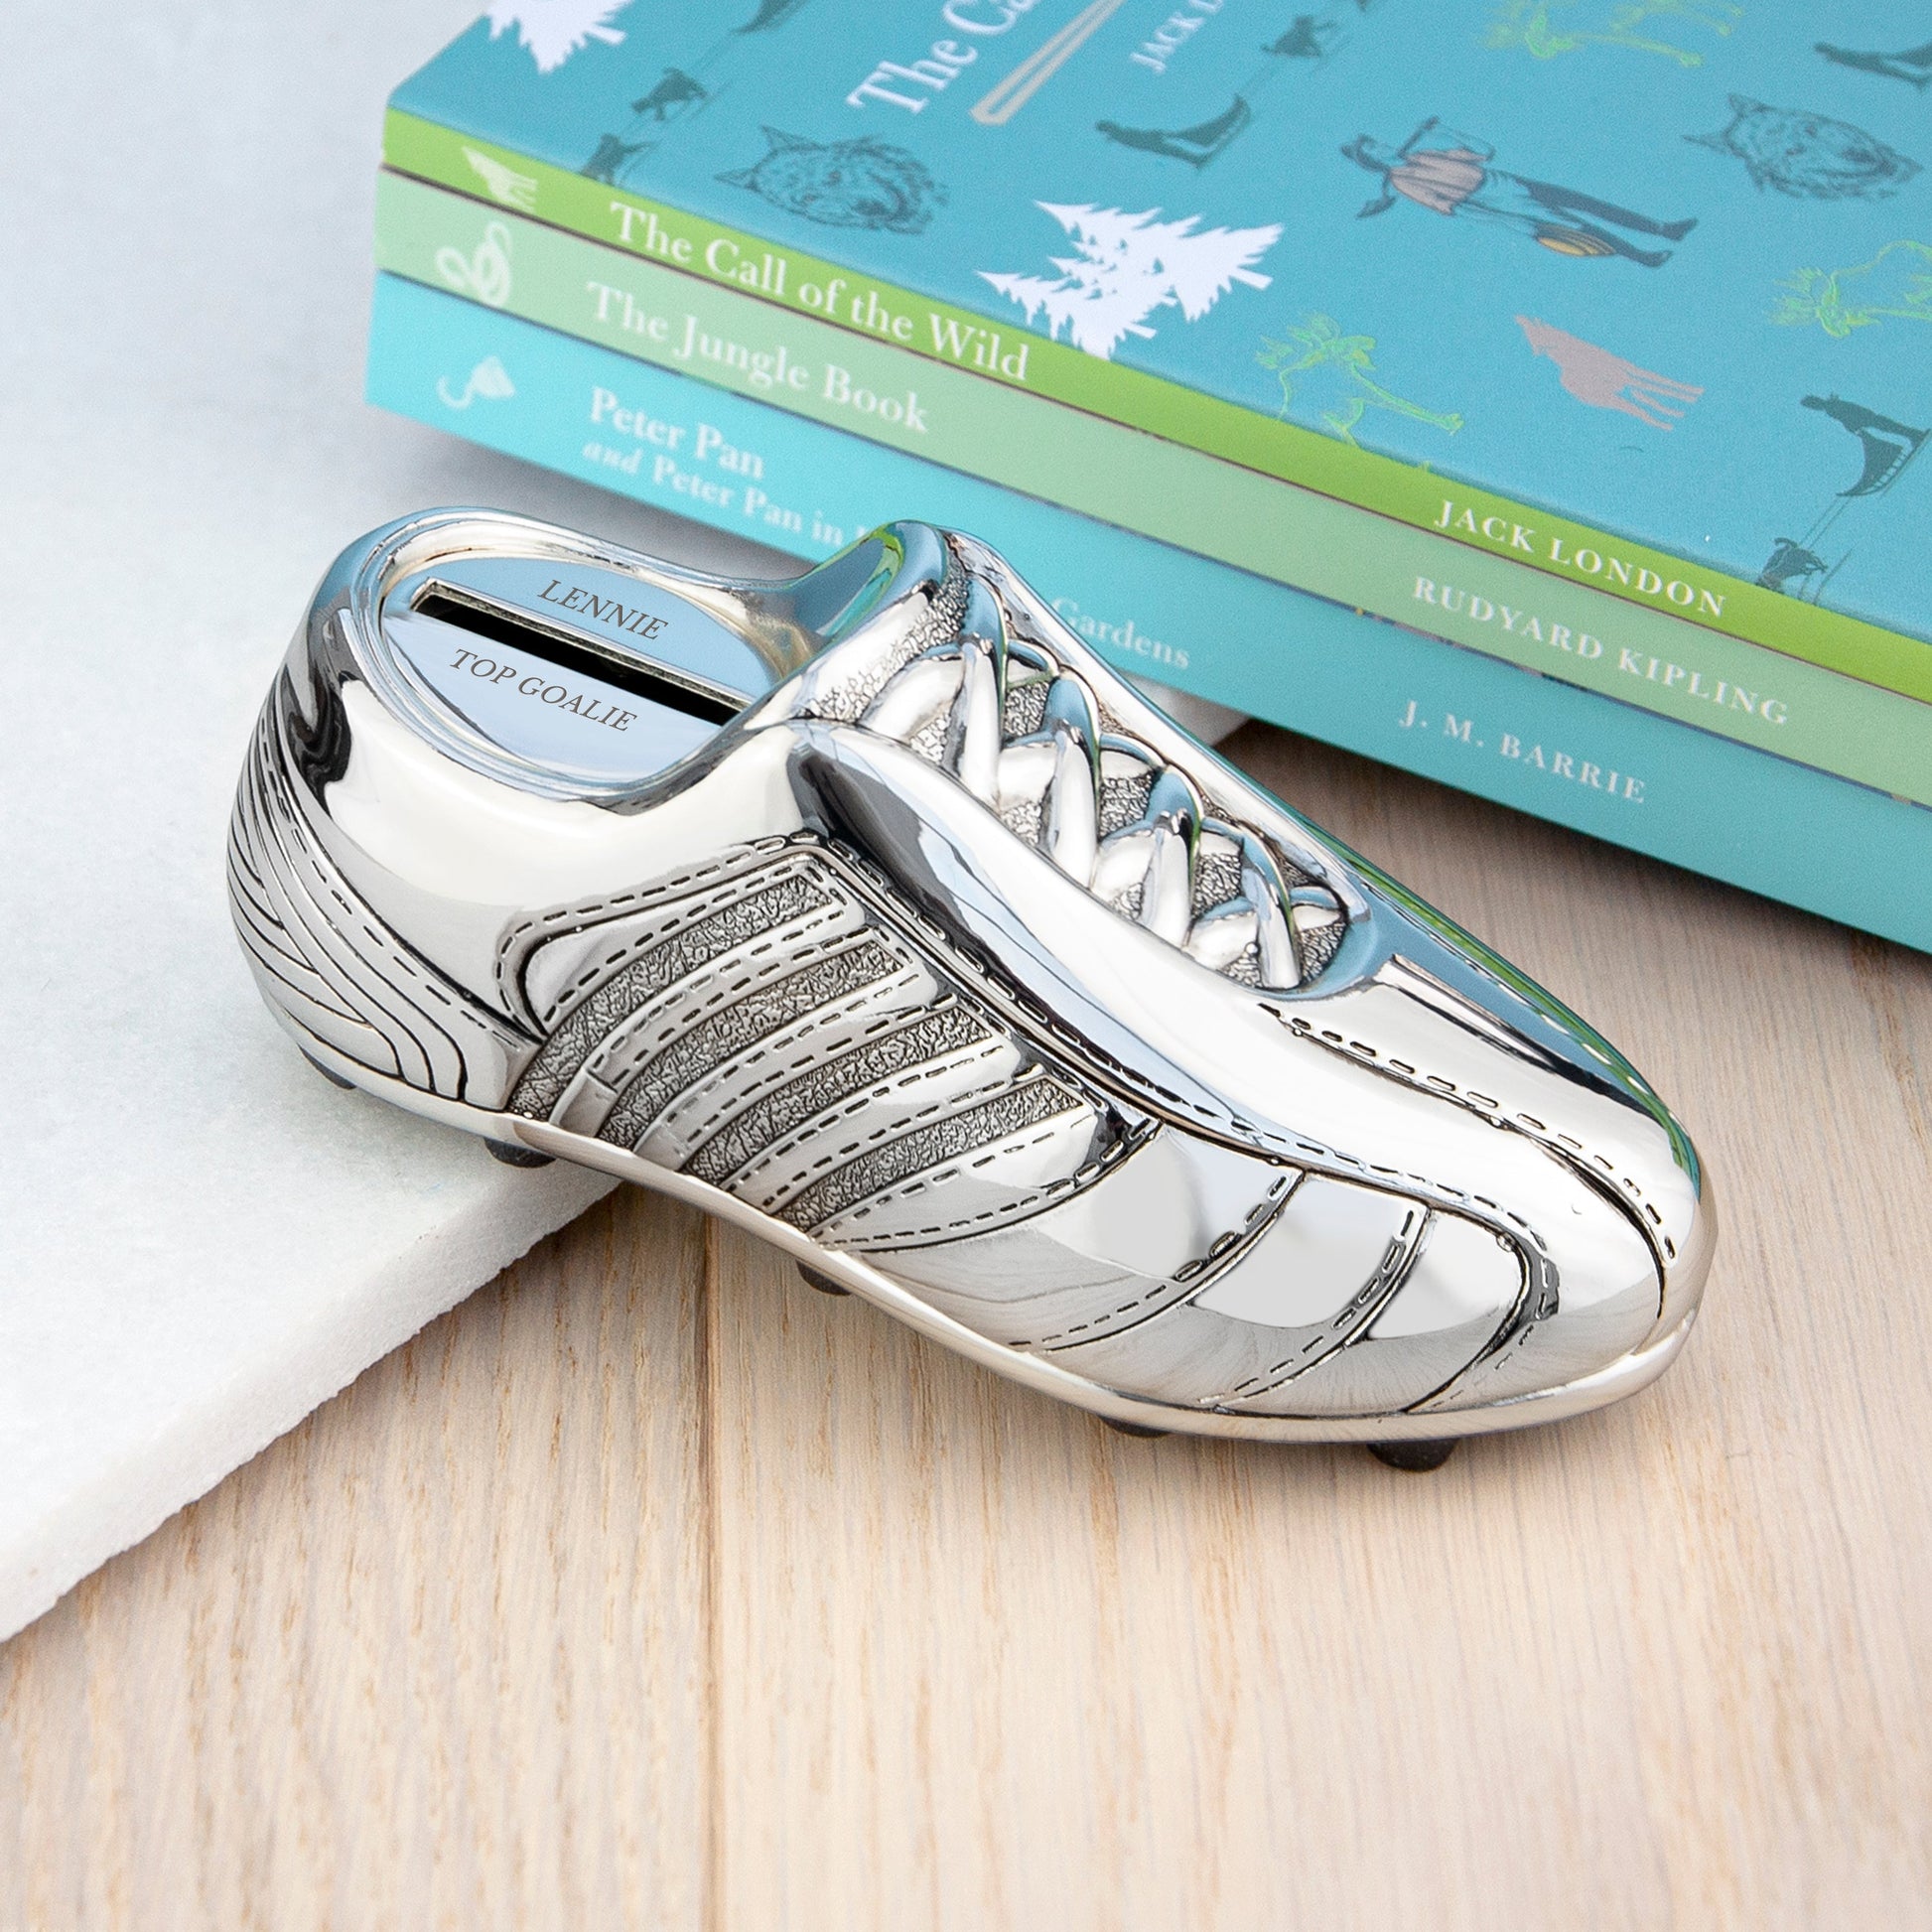 Personalized Money Boxes - Personalized Silver Plated Football Boot Money Box 